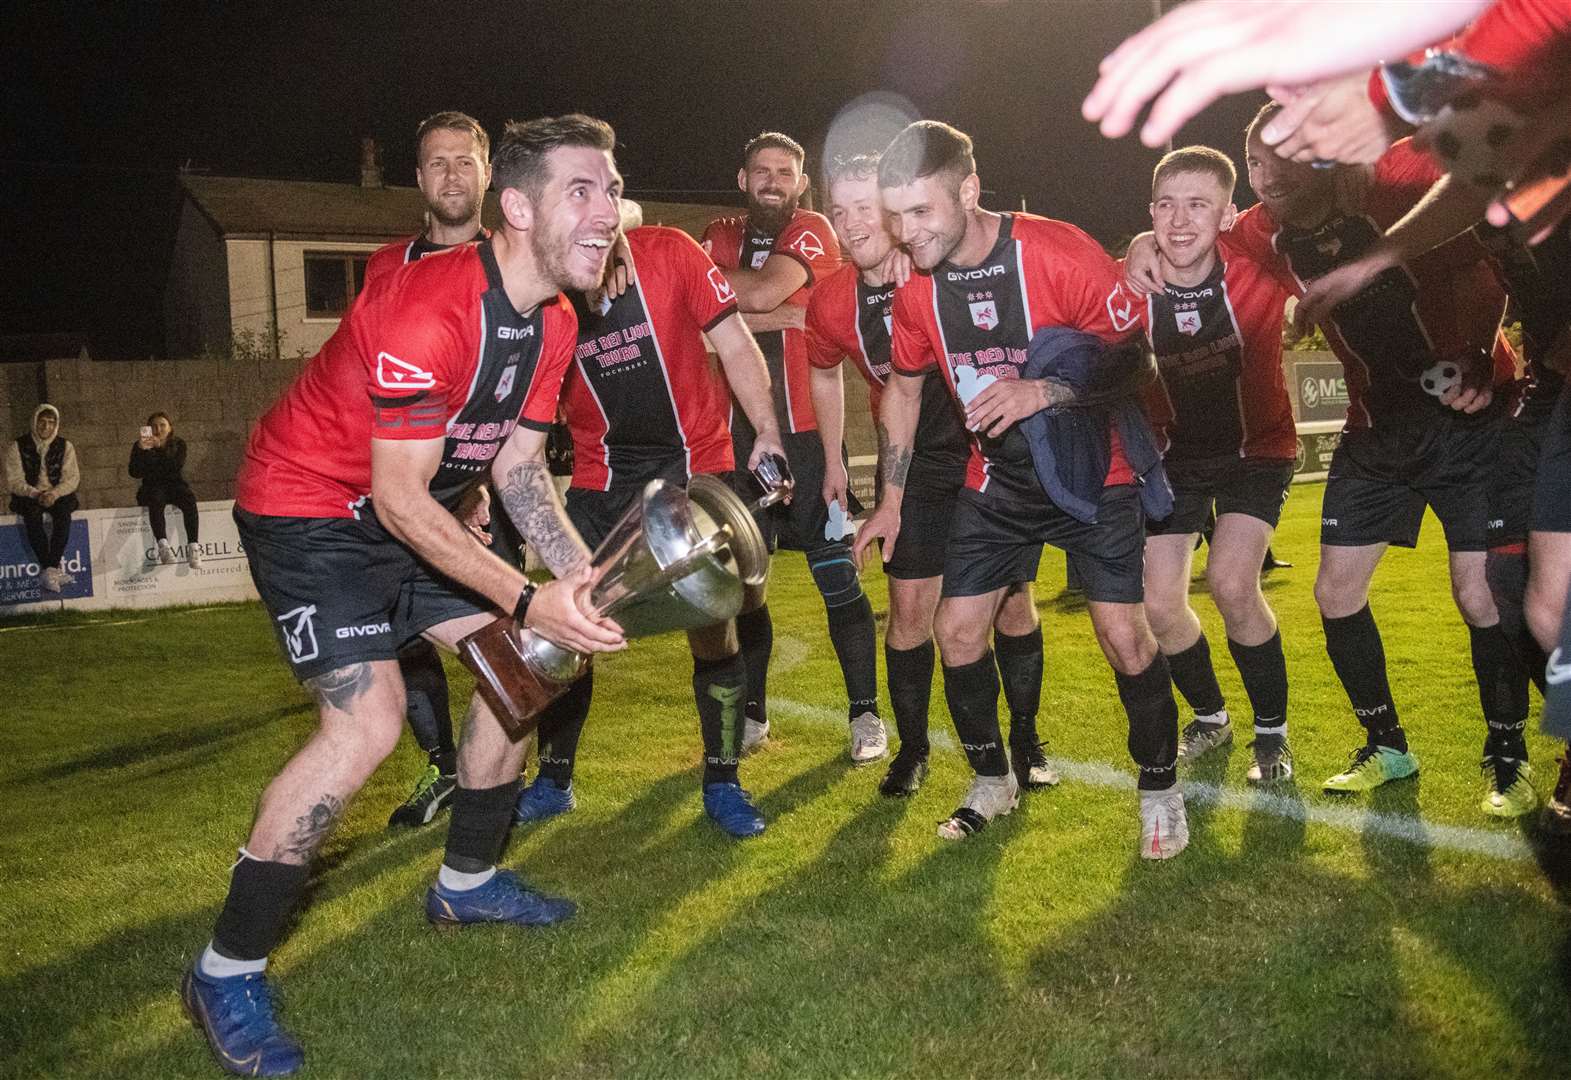 PICTURES: Welfare champs Fochabers retain cup against Hopeman